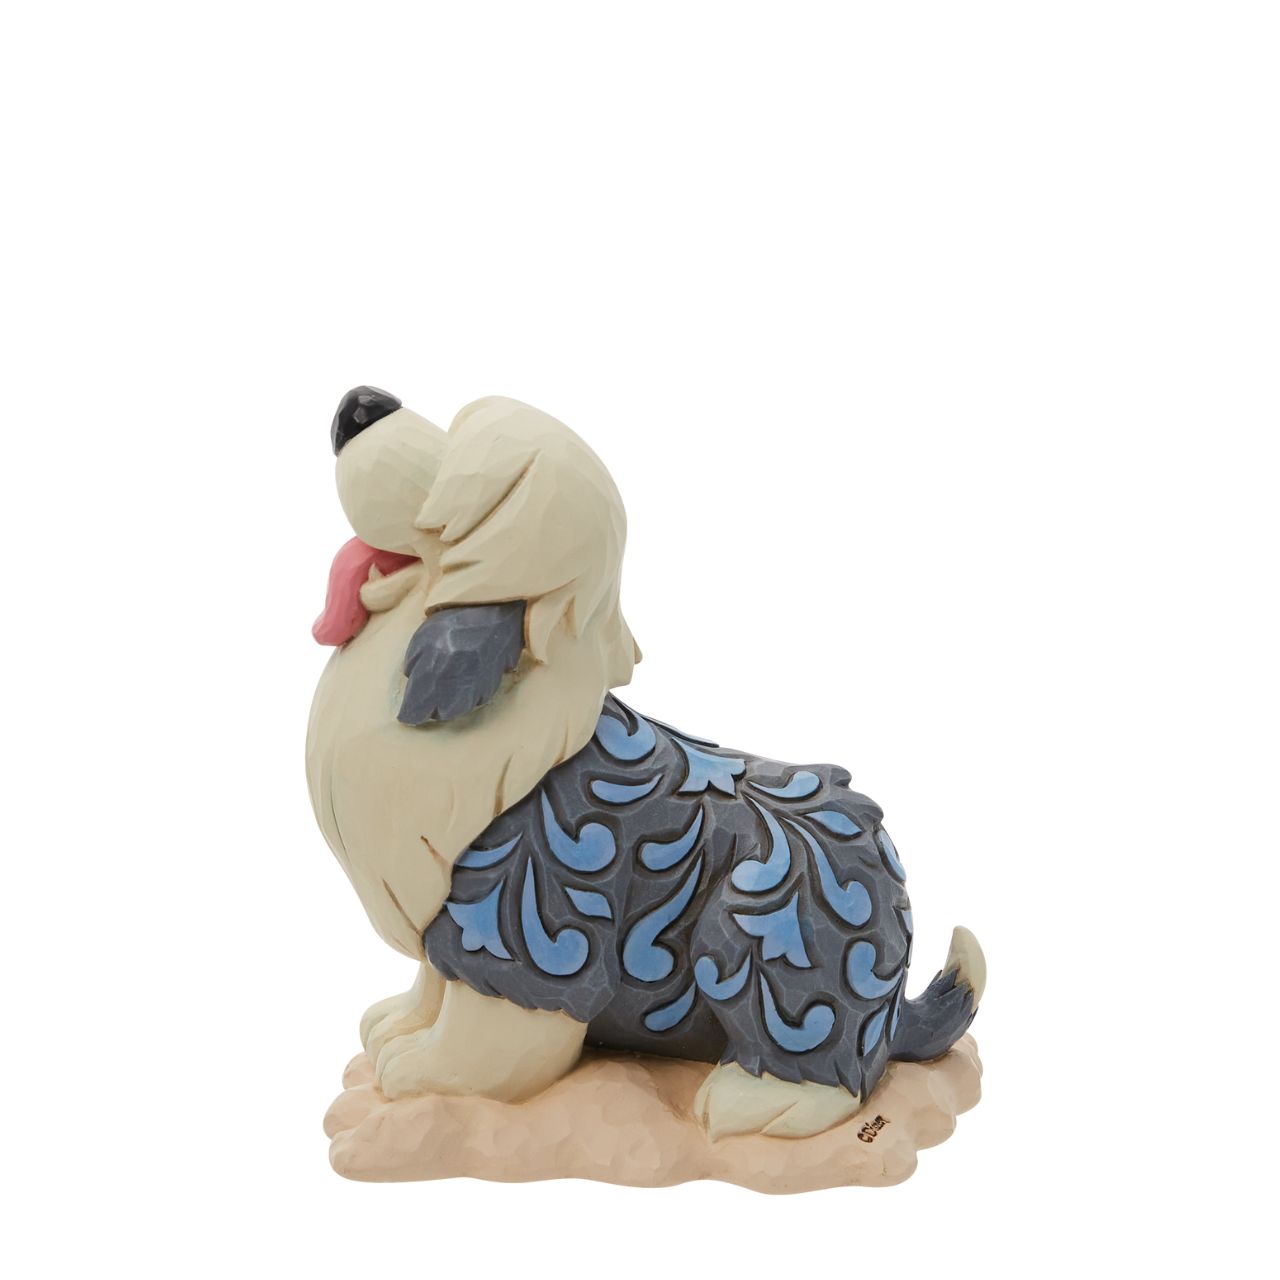 Max Mini Figurine by Jim Shore  Inspired by The Little Mermaid, this Jim Shore creation features Prince Eric's dog, Max, with the artist's iconic rosemale patterning and detailed craftsmanship. The replica makes a charming addition to any Disney lover's home décor.